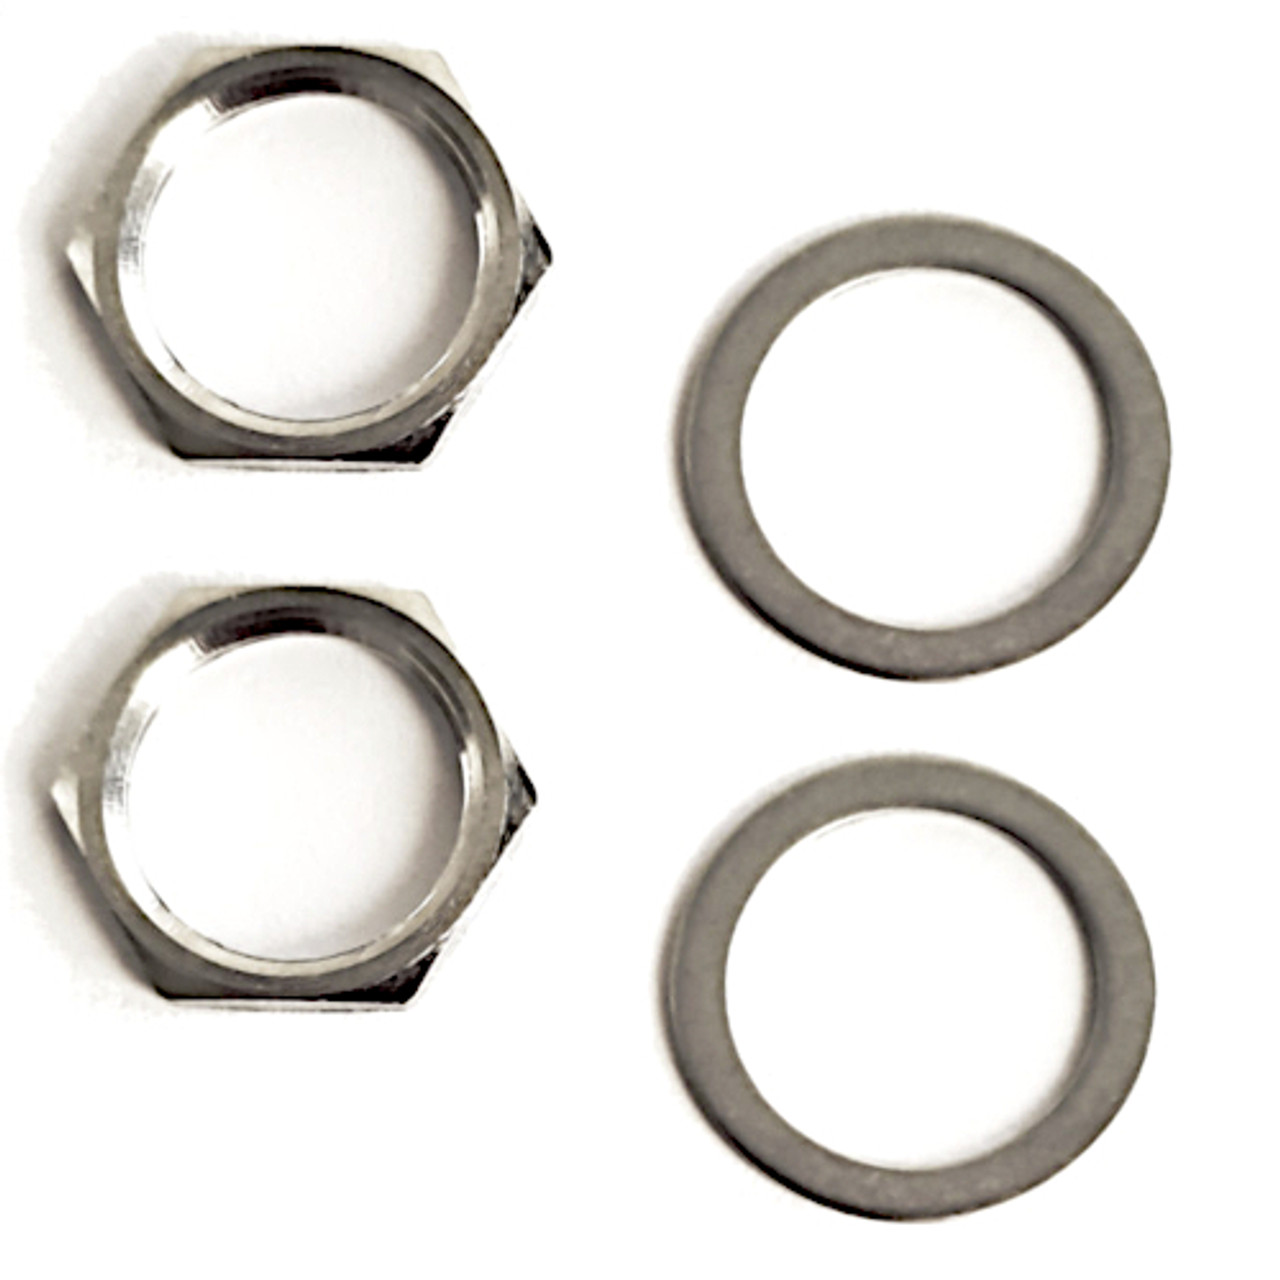 Hex Nuts & Flat Washers (2 each) For Switchcraft Toggle Switches-Nickel 